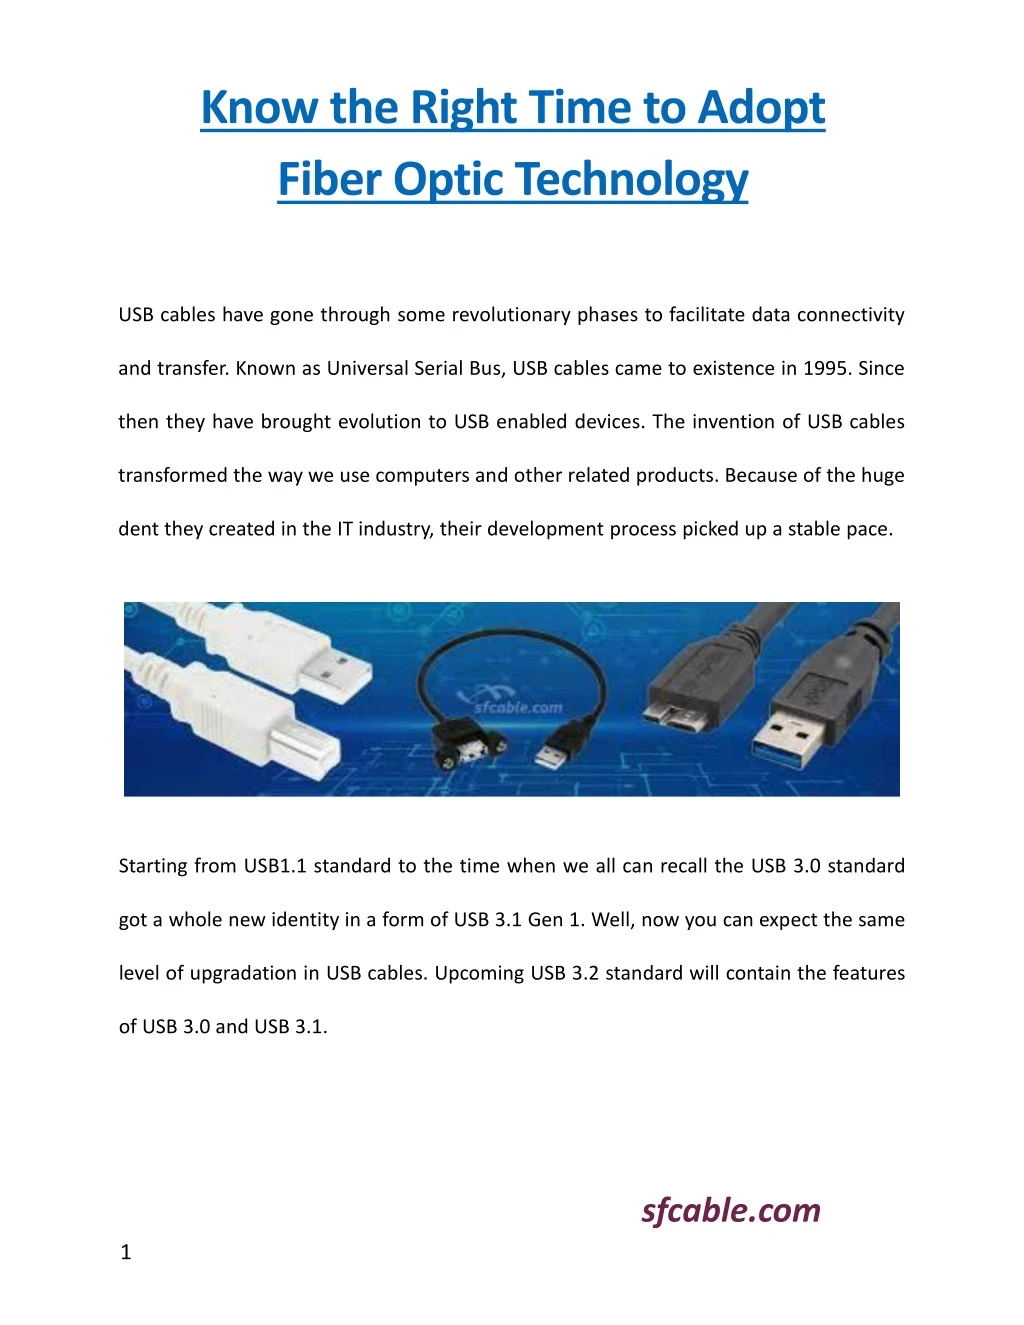 know the right time to adopt fiber optic